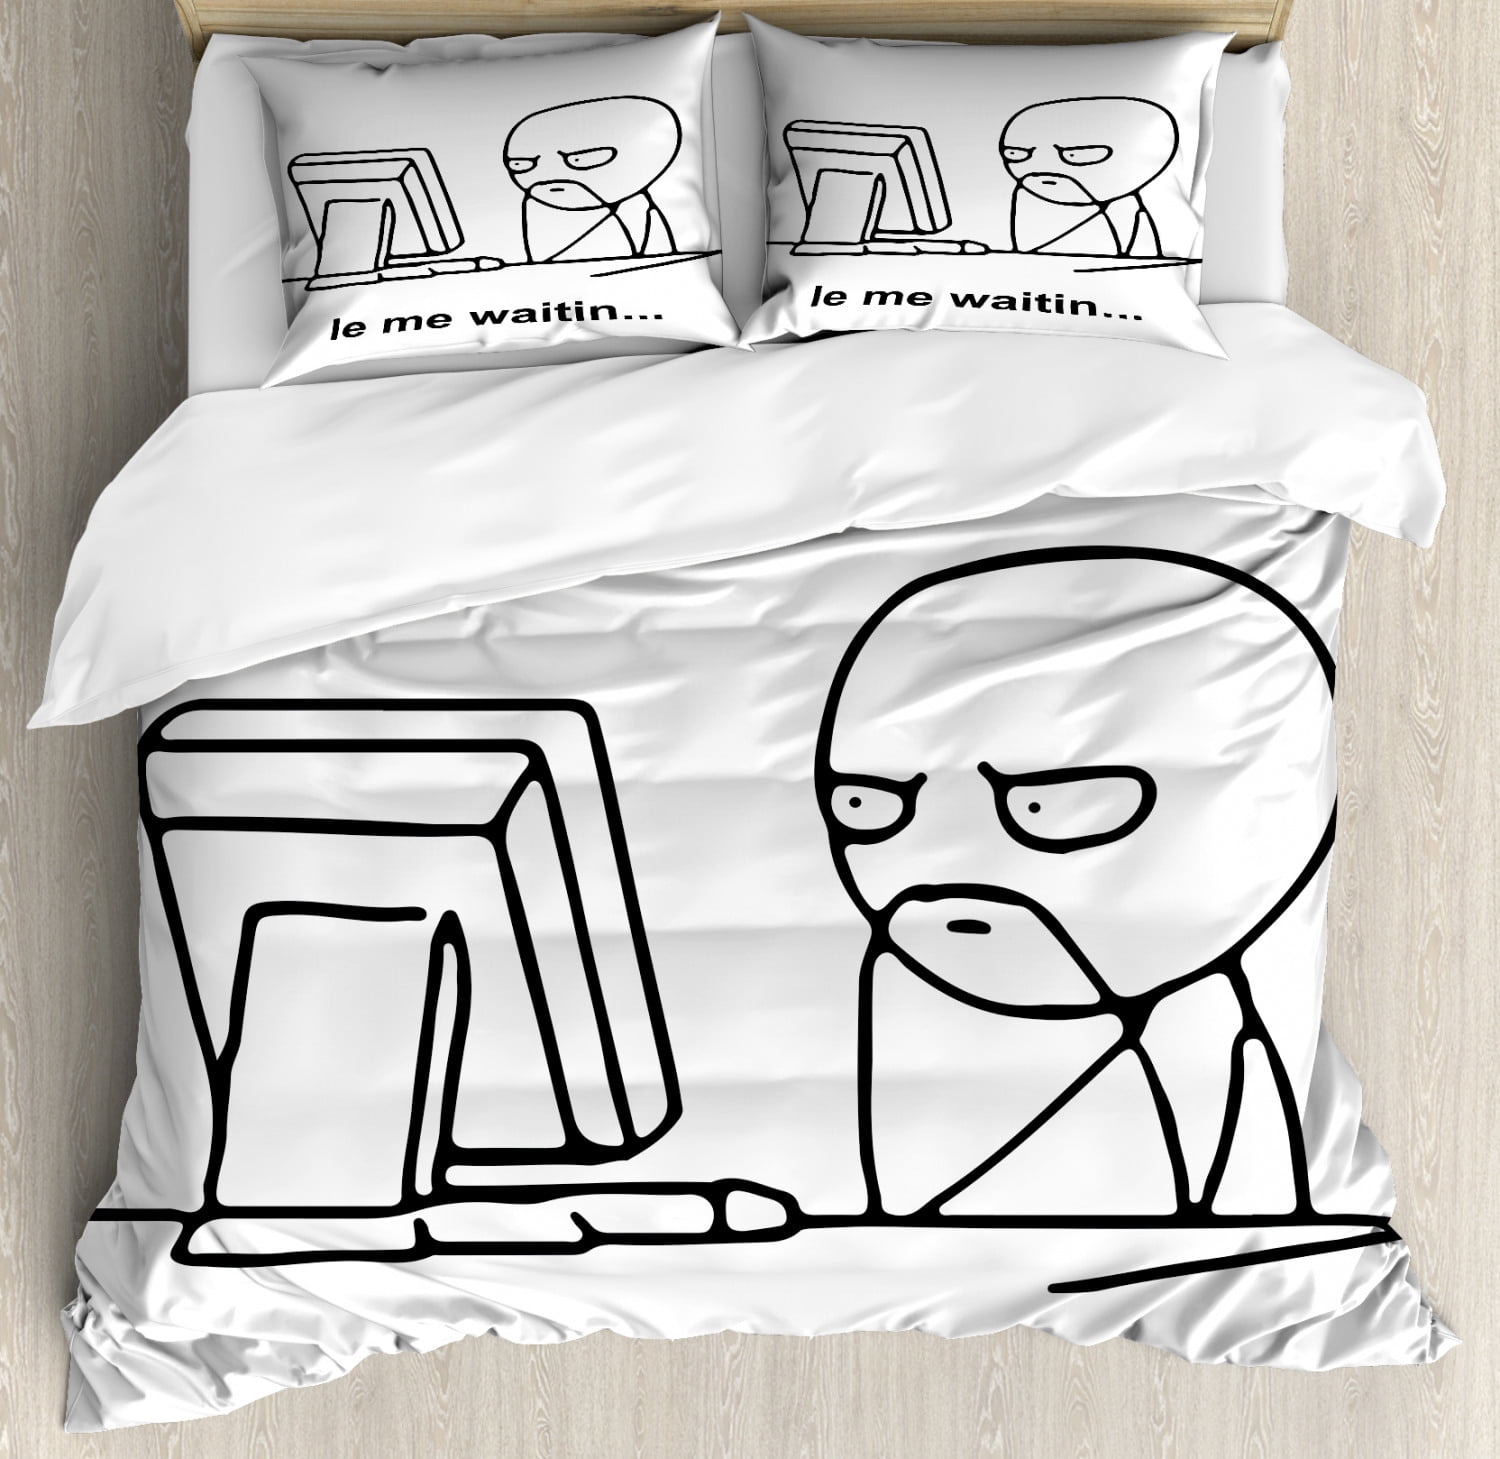 Humor Duvet Cover Set Stickman Meme Face Icon Looking At Computer